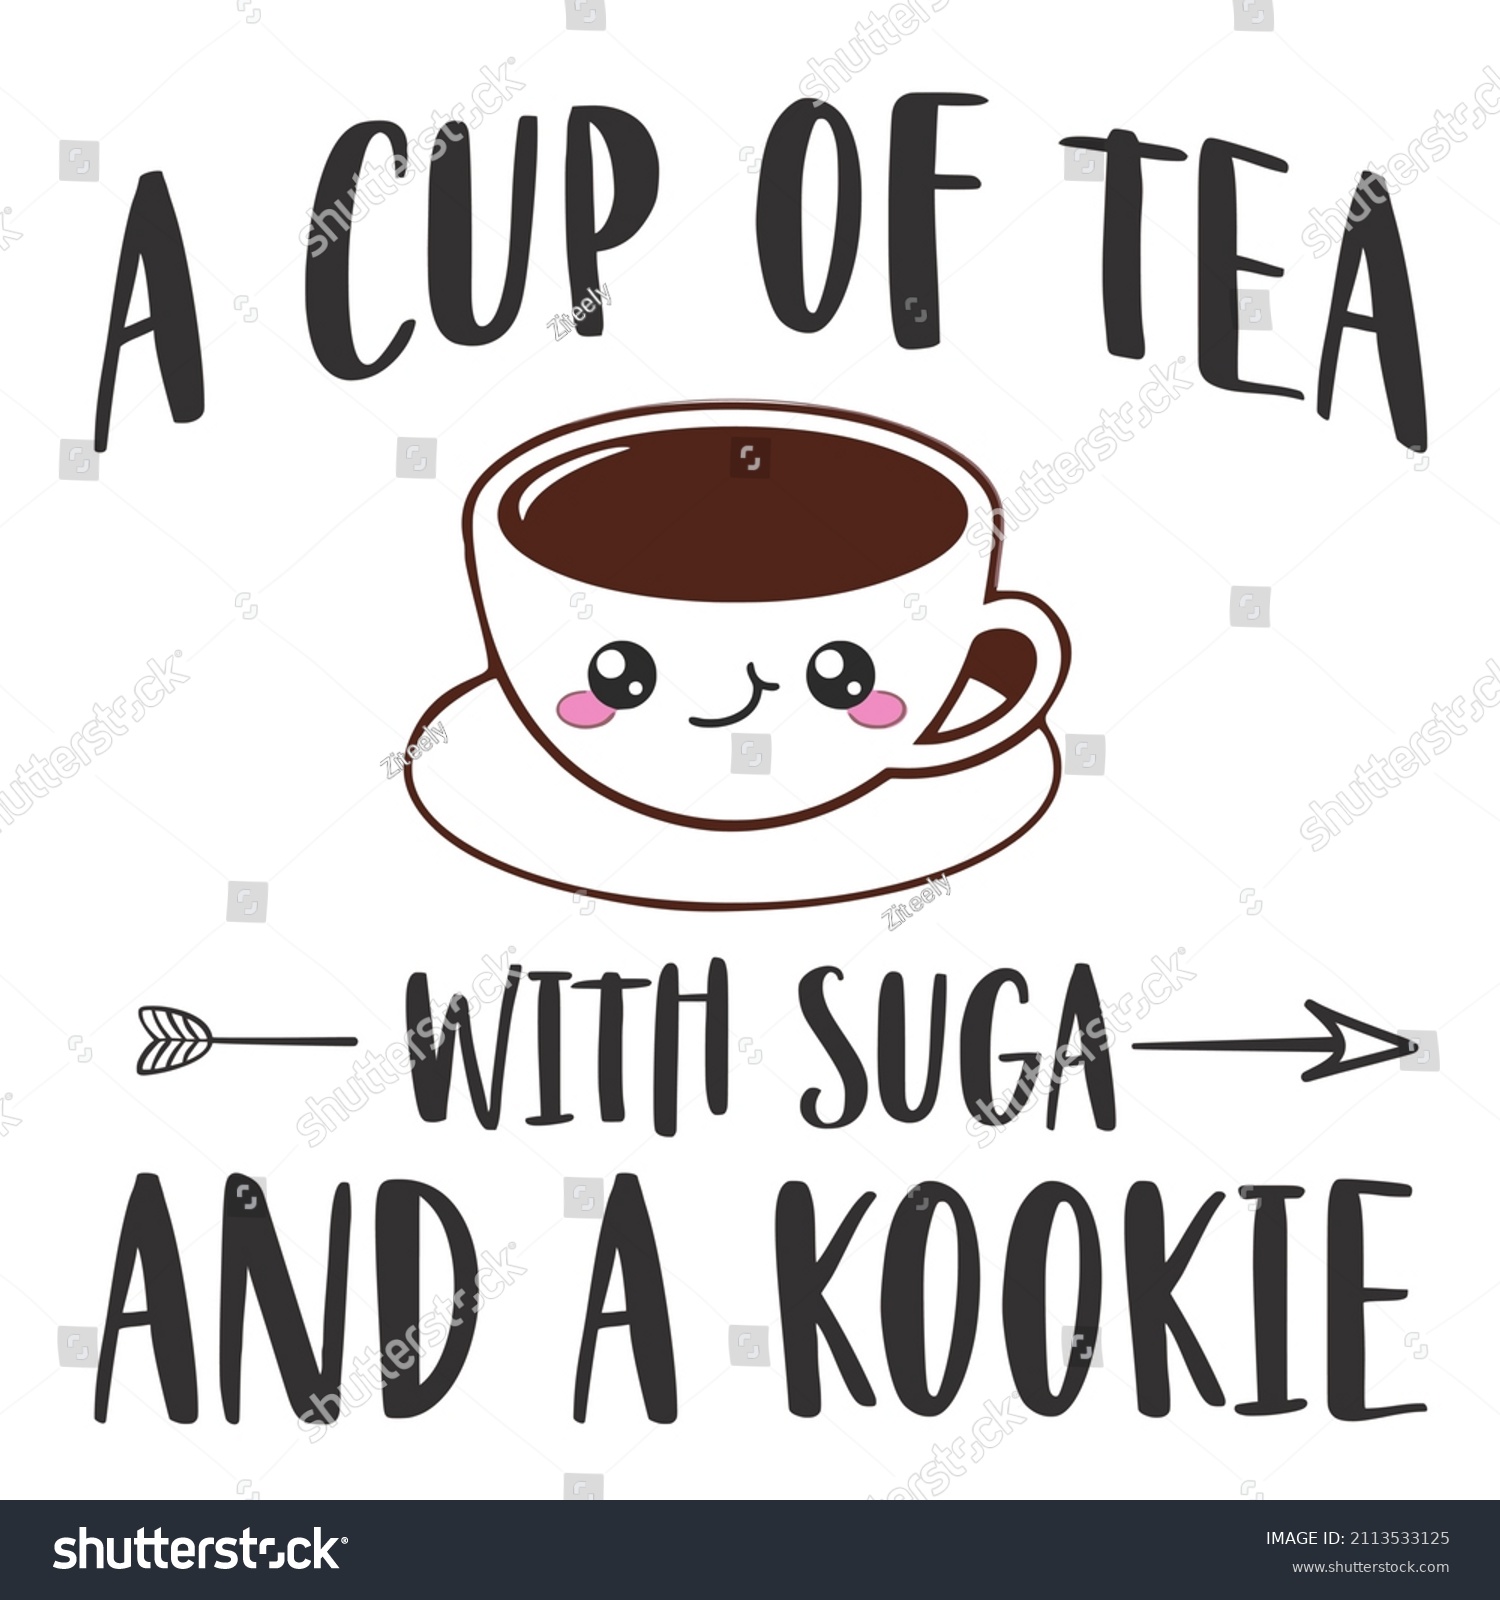 SVG of A Cup of Tea with suga and a kookie

Trending vector quote on white background for t shirt, mug, stickers etc.
 svg